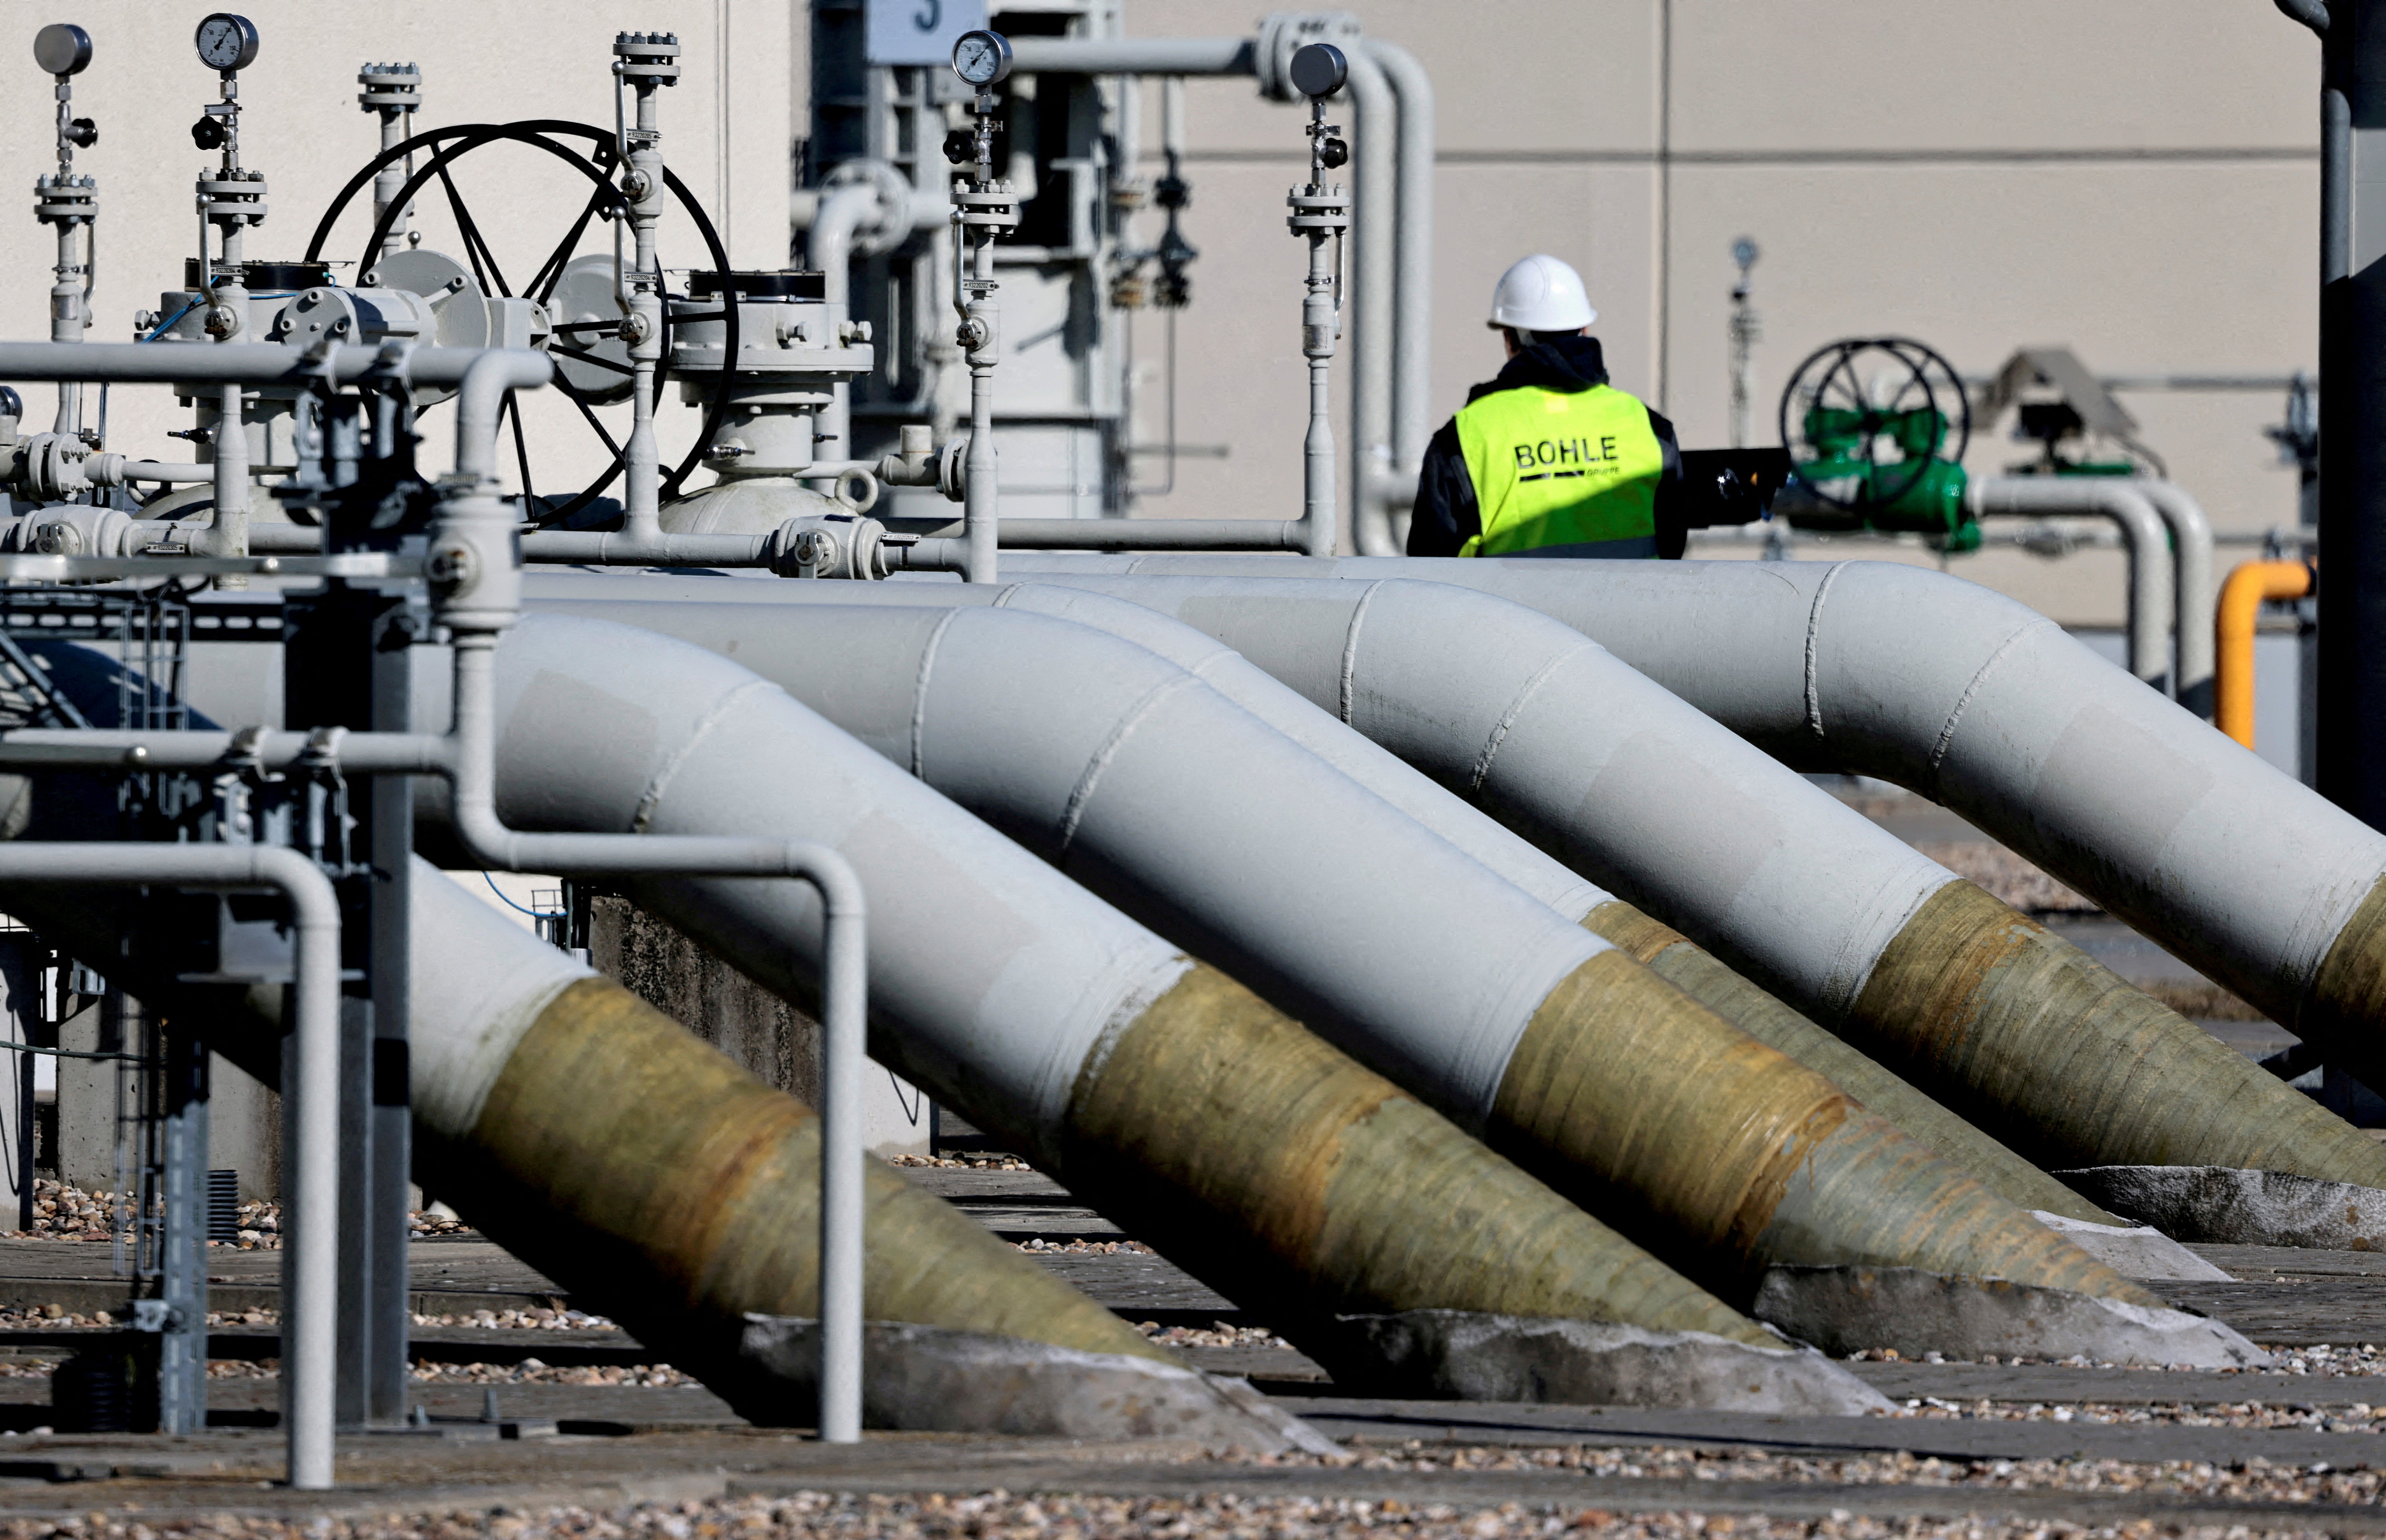 Pipes at the landfall facilities of the ruptured Nord Stream 1 gas pipeline